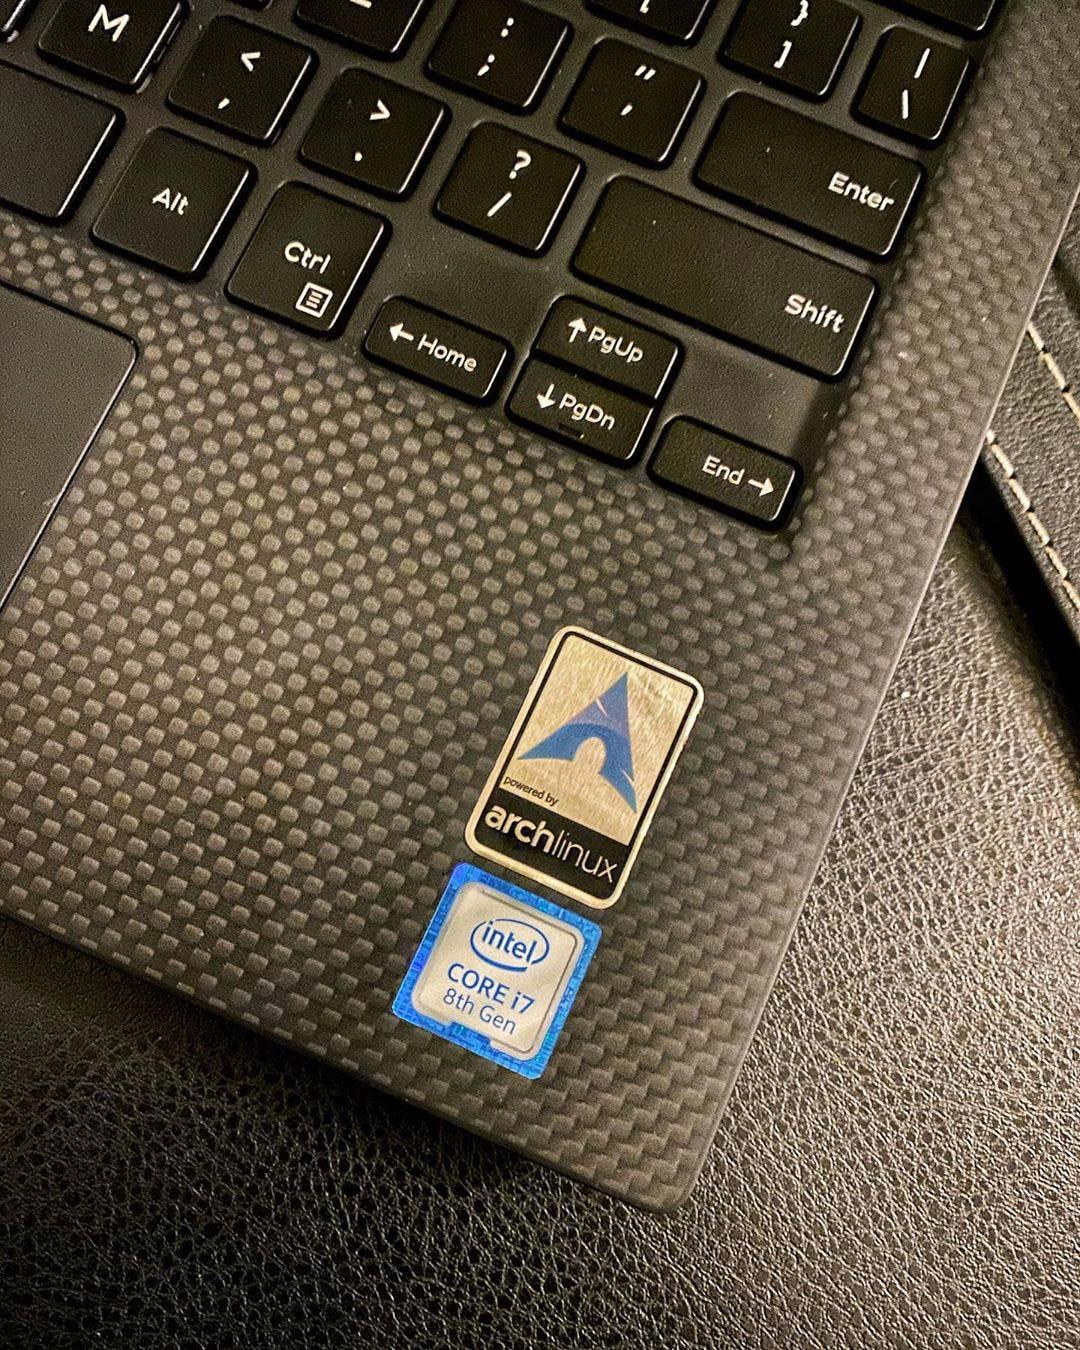 Dell XPS-13 Powered by Arch Linux